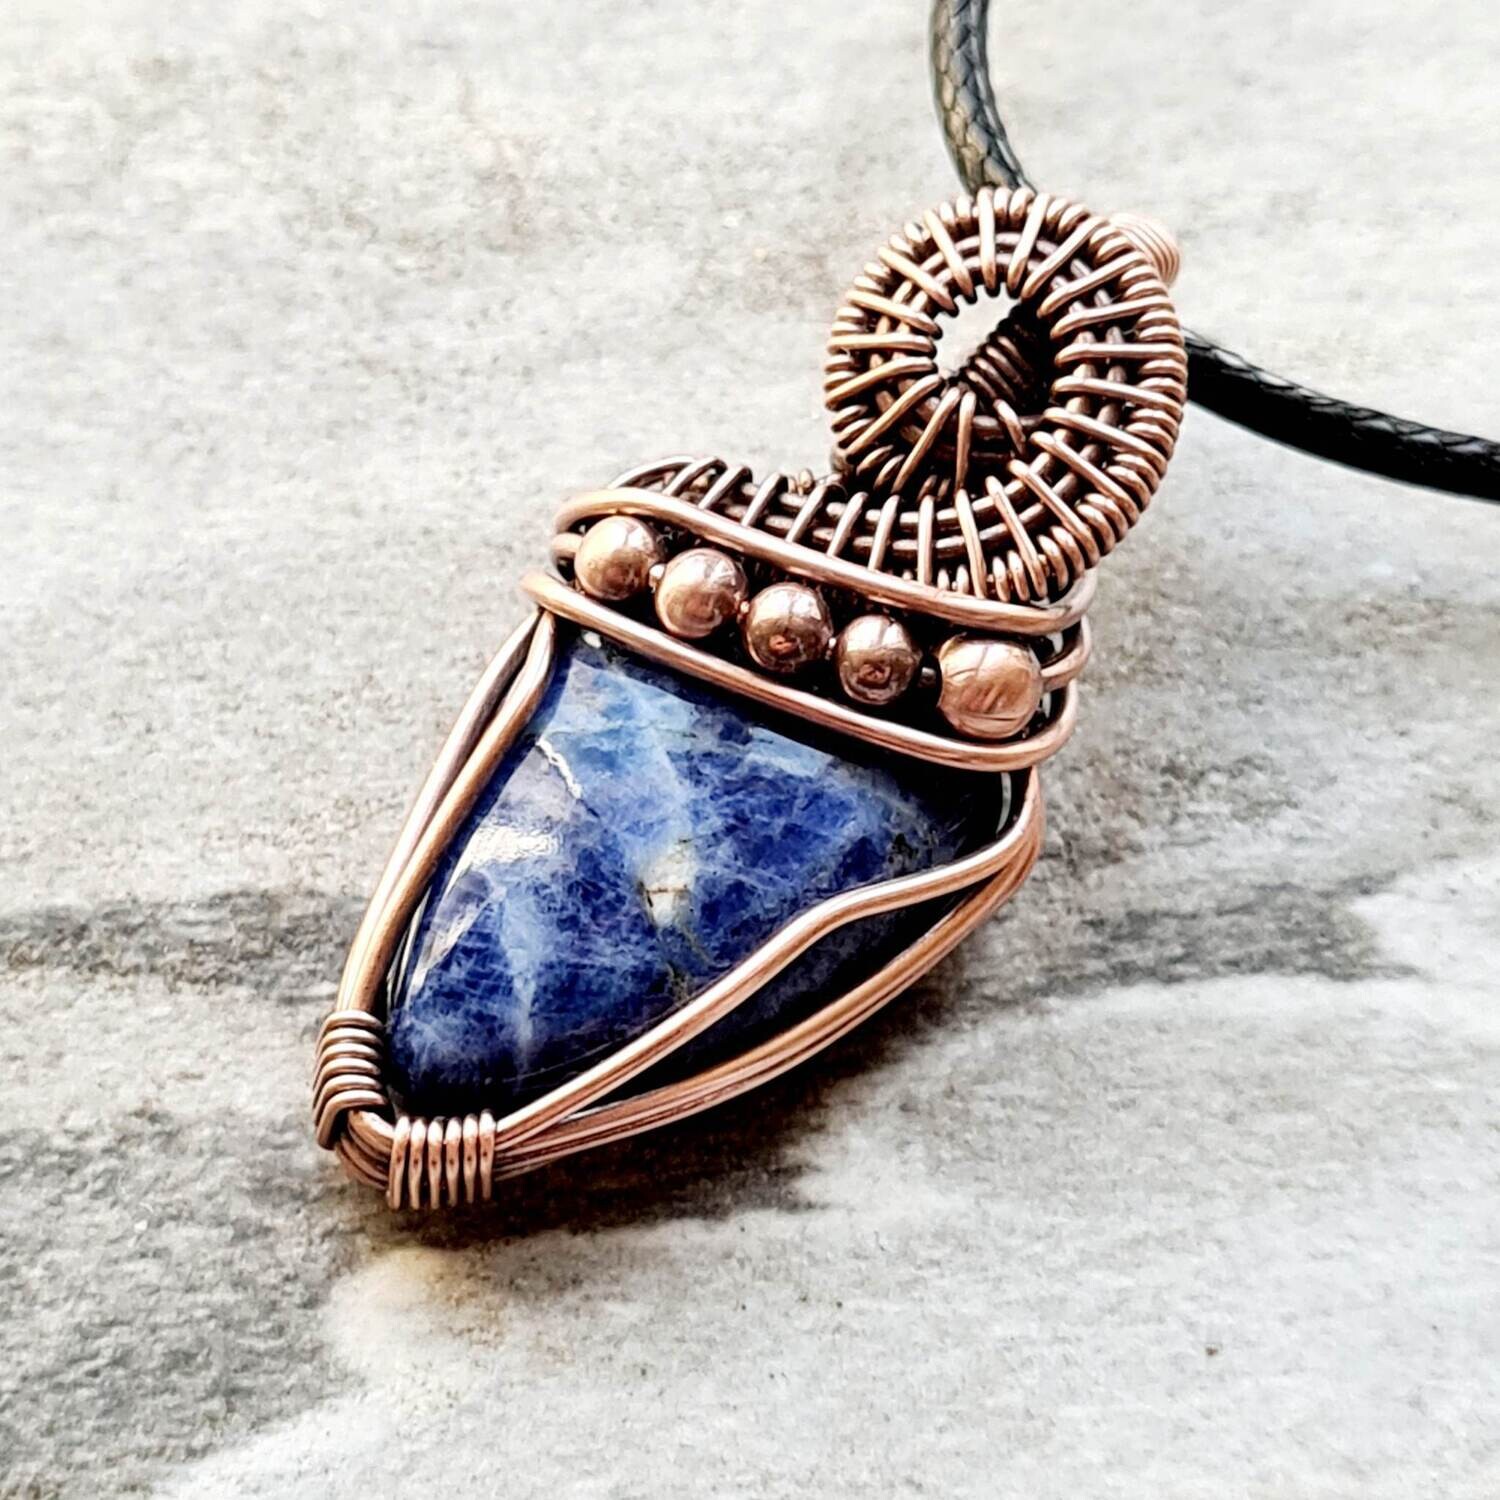 Sodalite pendant with chain.